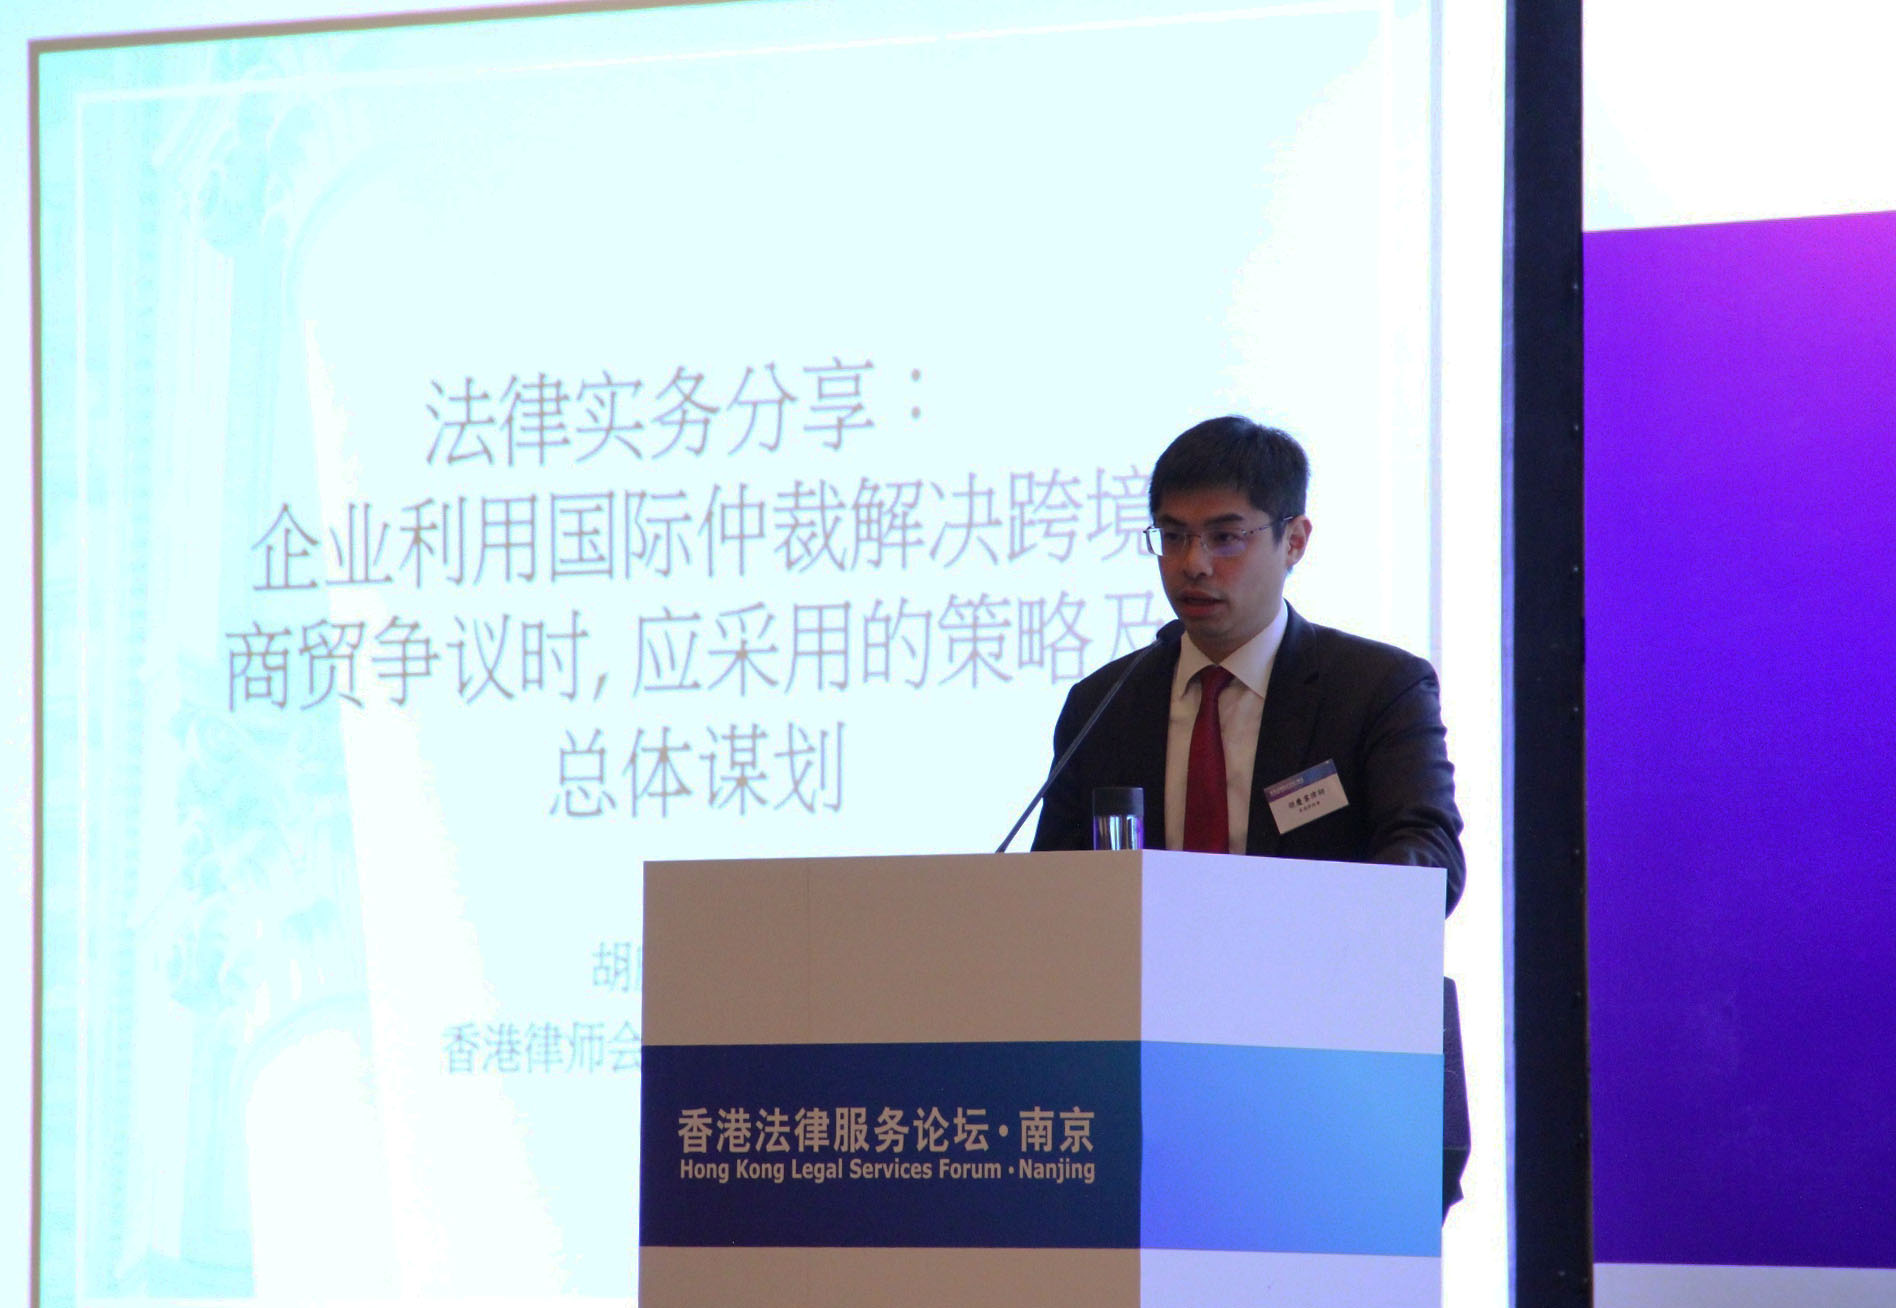 Eric Woo of ONC Lawyers gave a seminar at the Hong Kong Legal Services Forum in Nanjing and acted as panel discussion speaker